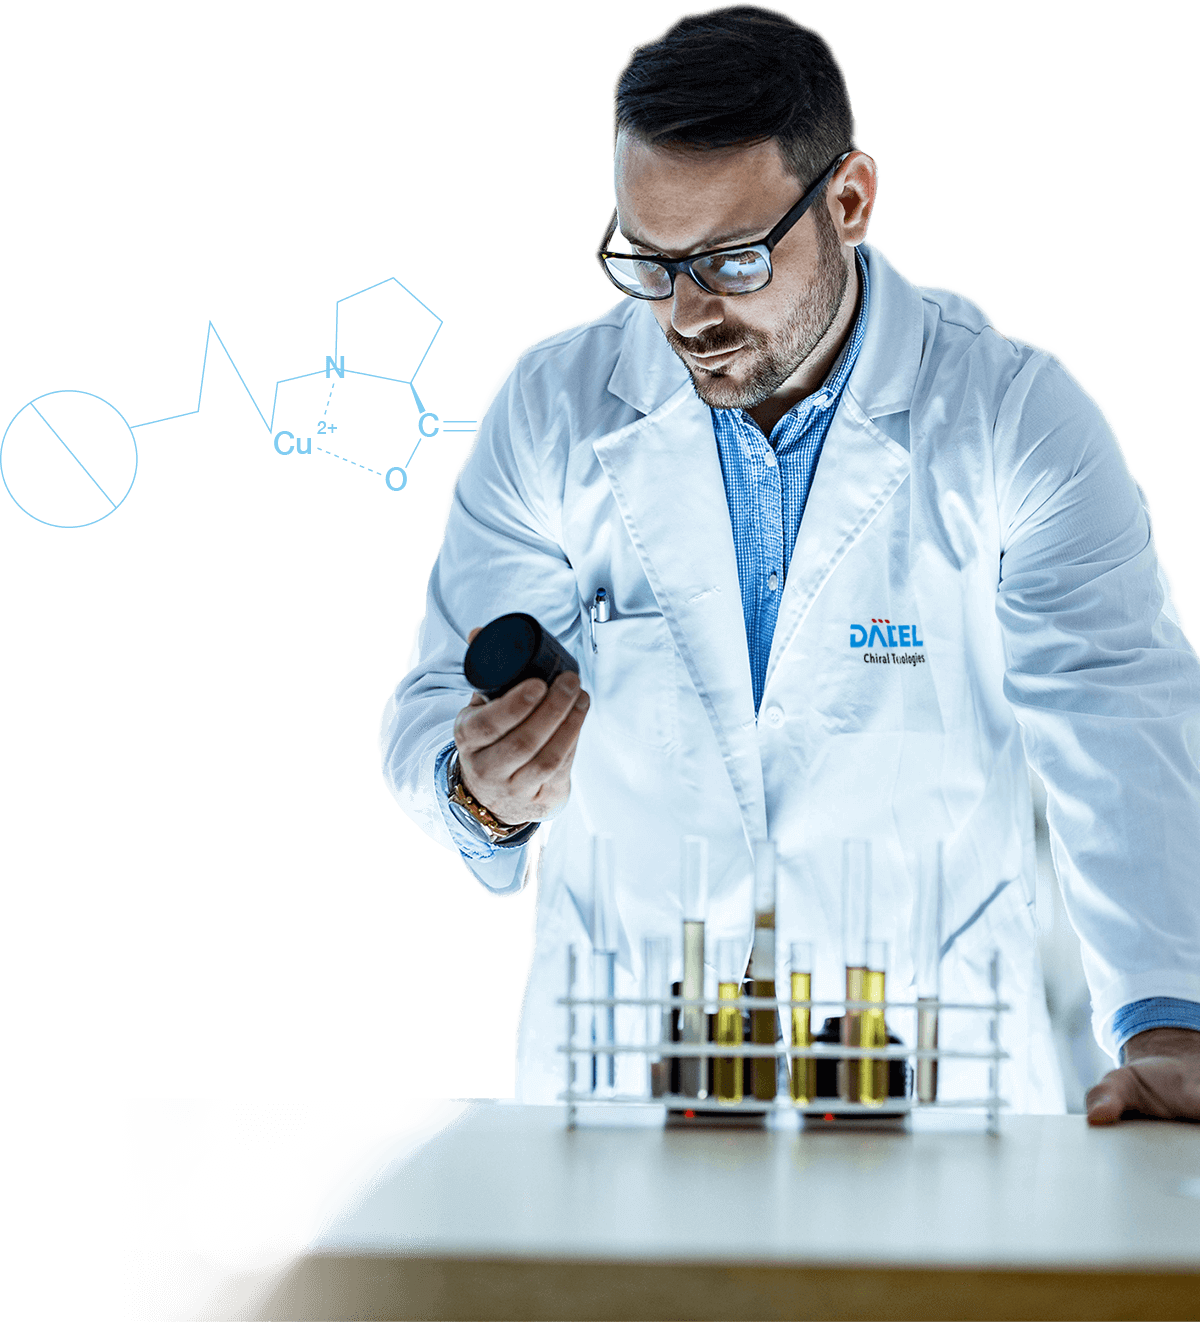 image of scientist in life sciences industry specializing in chiral enantiomers